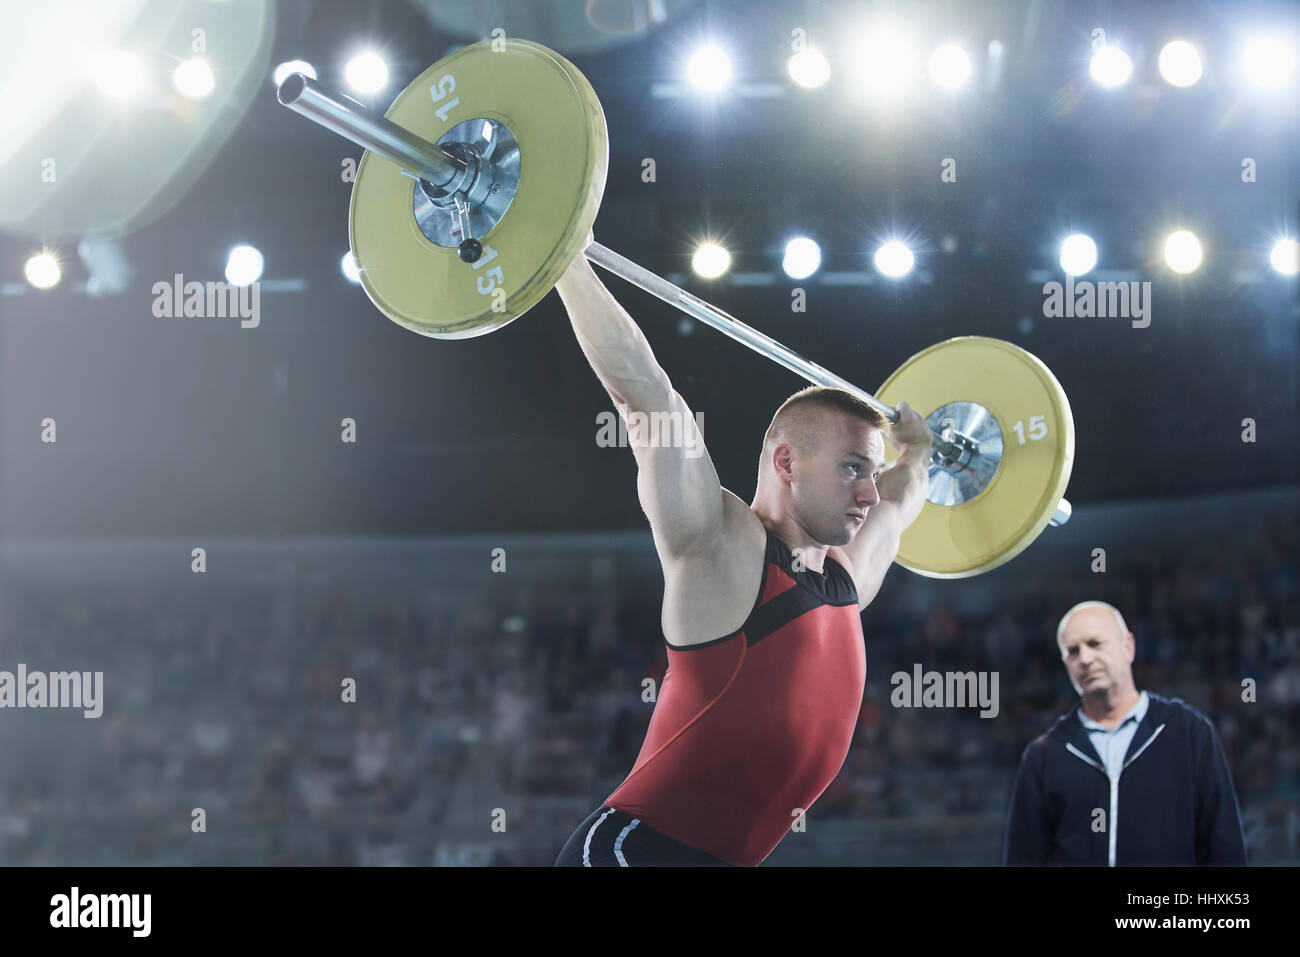 Coach watching male weightlifter squatting barbell overhead in arena Stock Photo